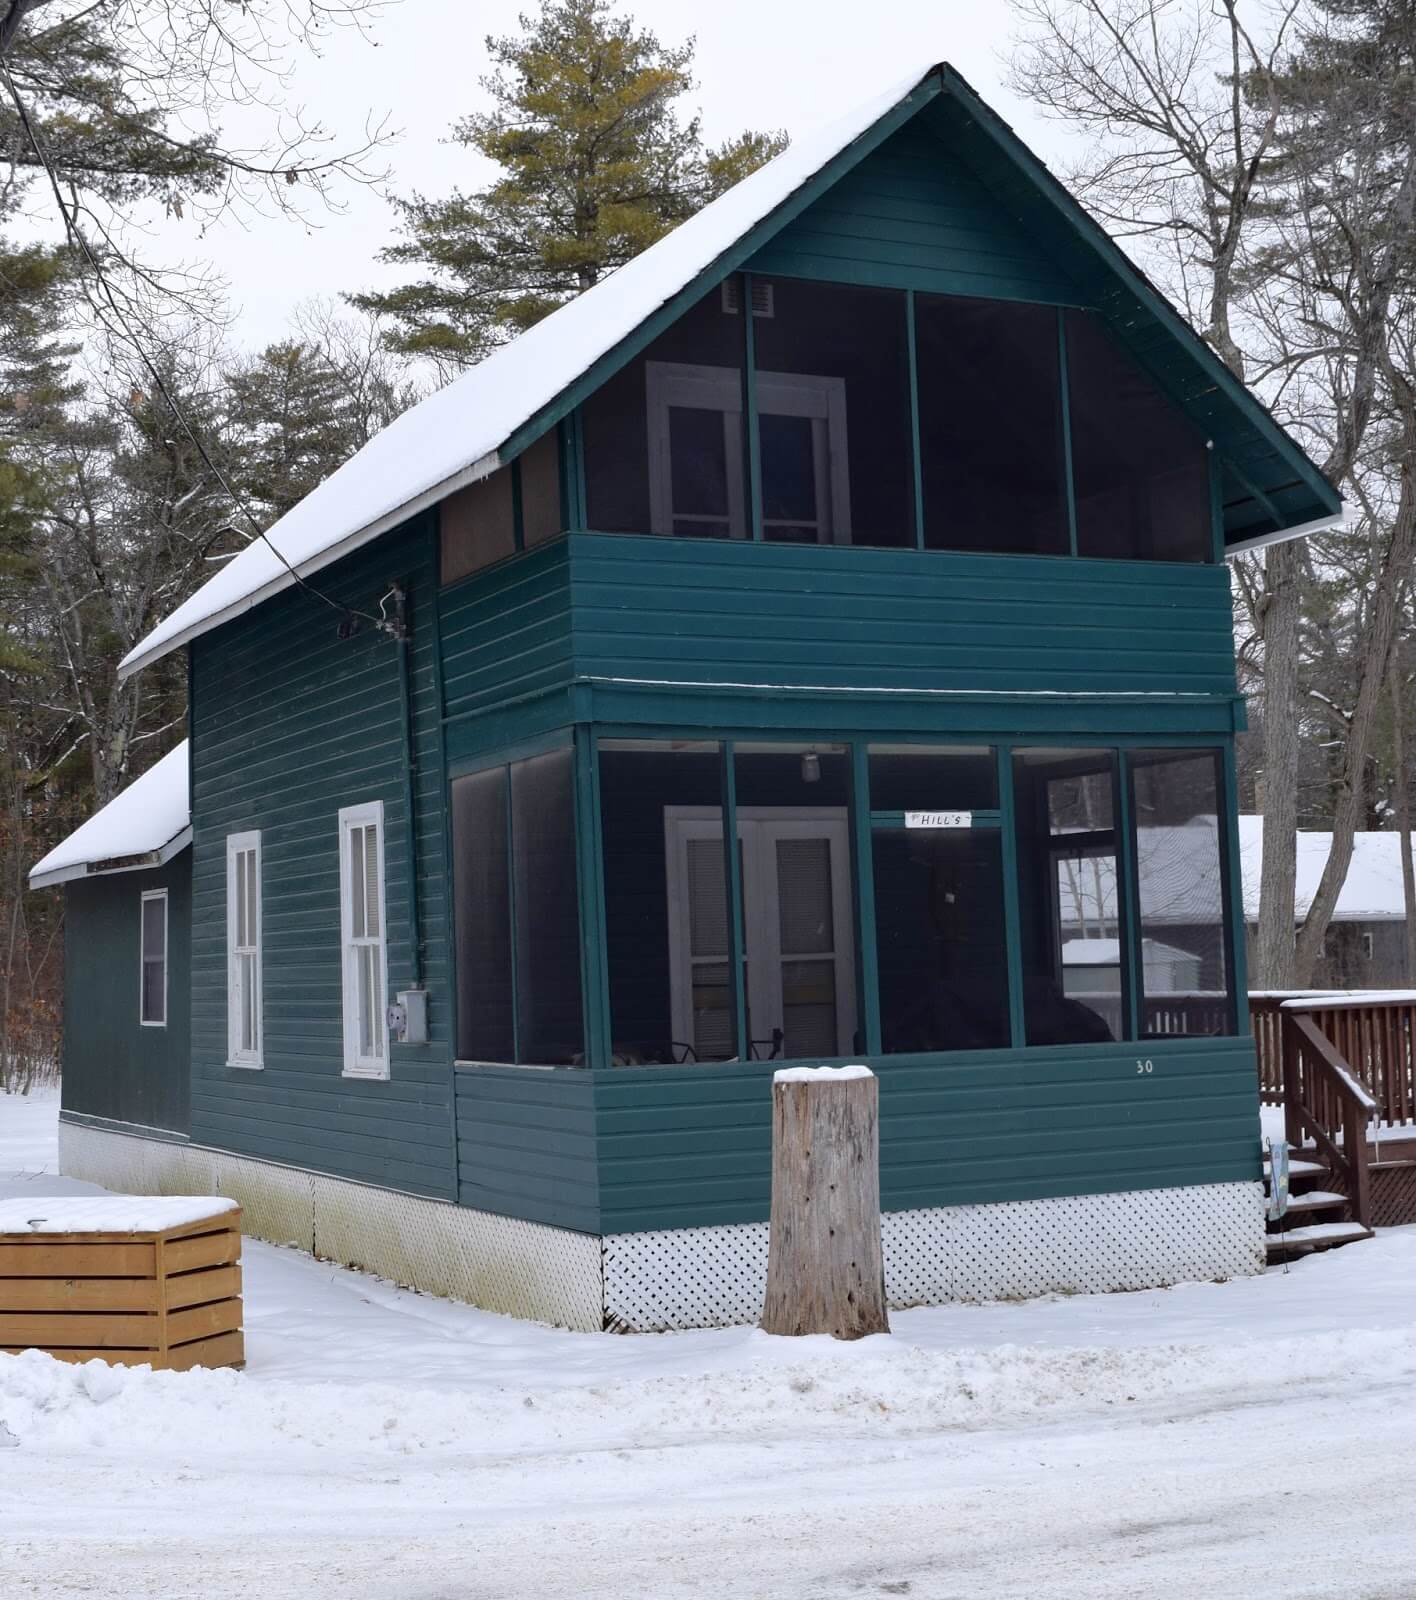 A medium sized cottage in the winter time with Ontario resort Architecture surrounded by snow